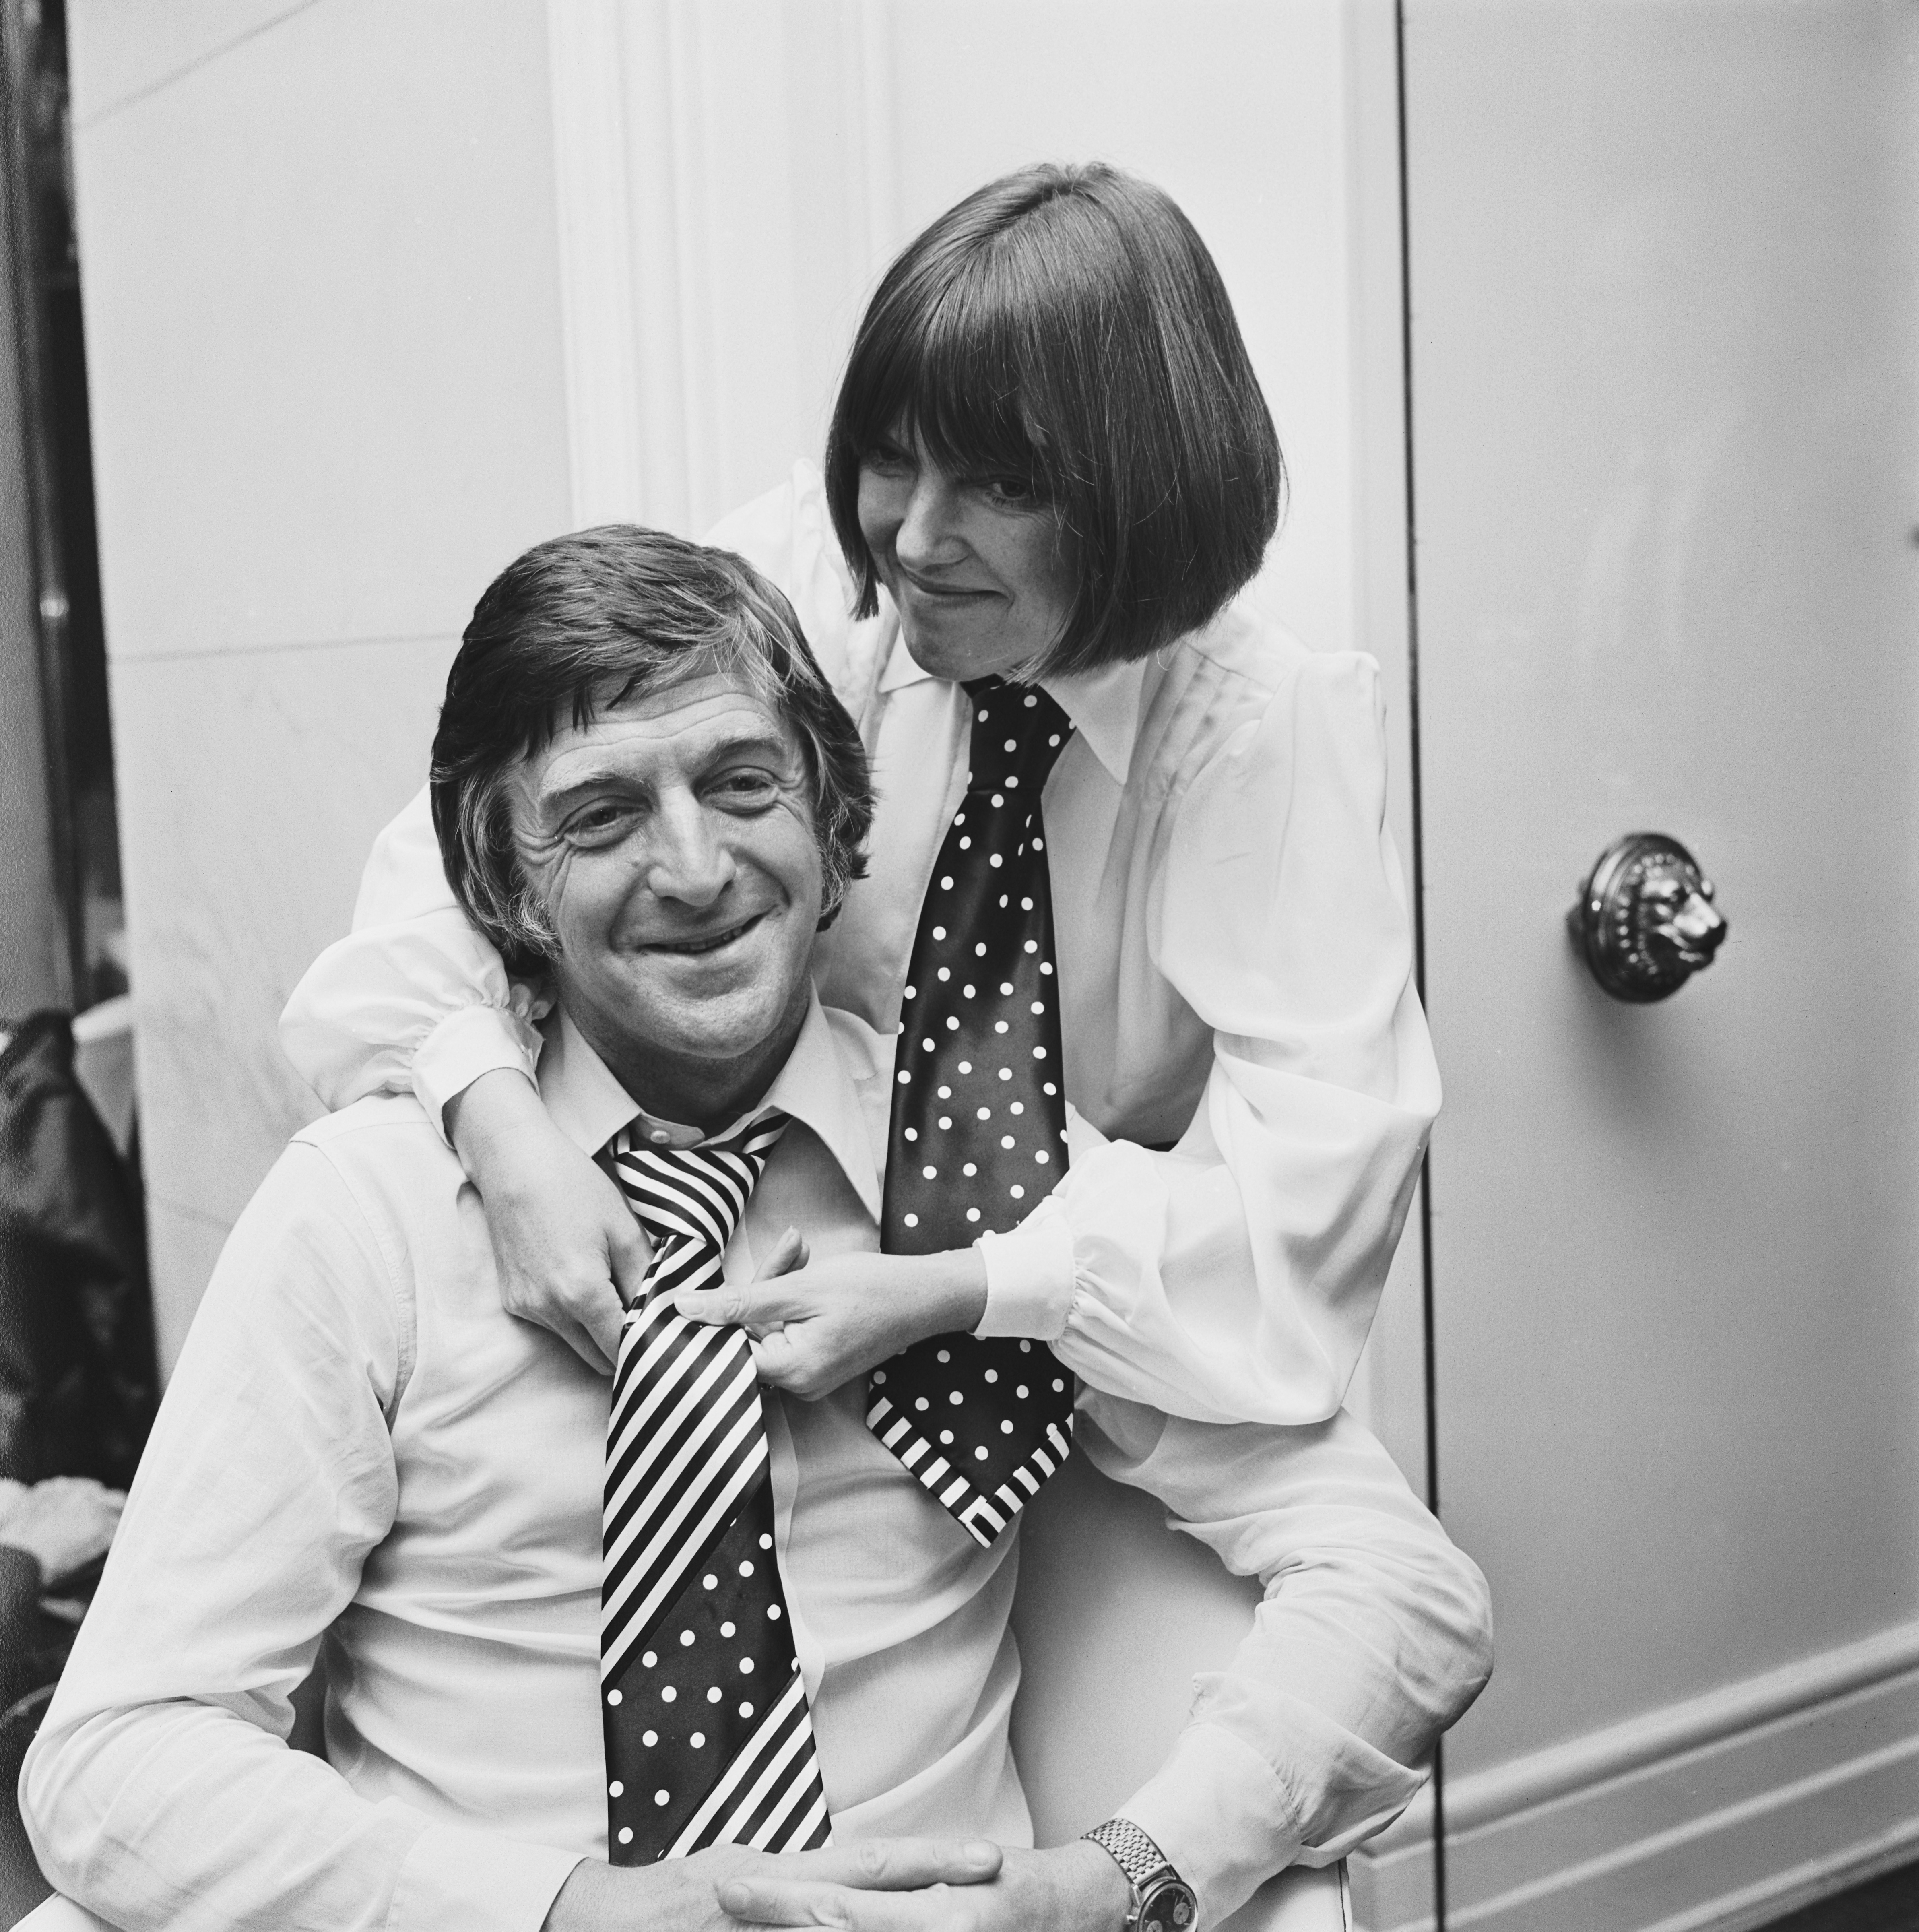 Mary Quant adjusts a polka dot striped necktie on English broadcaster, journalist and author Michael Parkinson